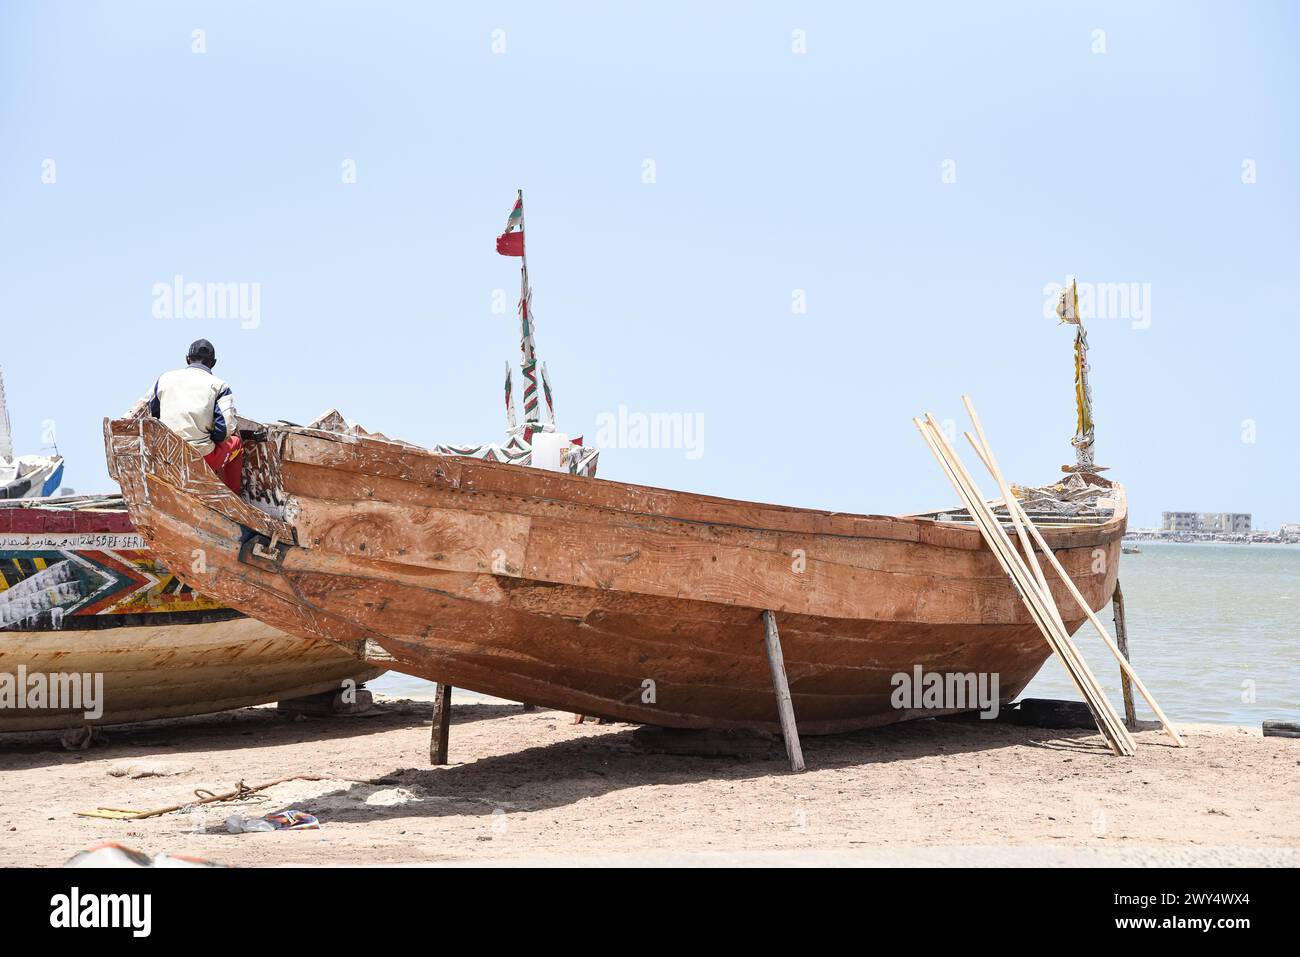 Nicolas Remene / Le Pictorium -  In the streets of Saint Louis, Senegal -  31/03/2024  -  Senegal / Saint-Louis / Saint-Louis  -  A pirogue under construction in Saint-Louis, Senegal, on March 31, 2024. Stock Photo